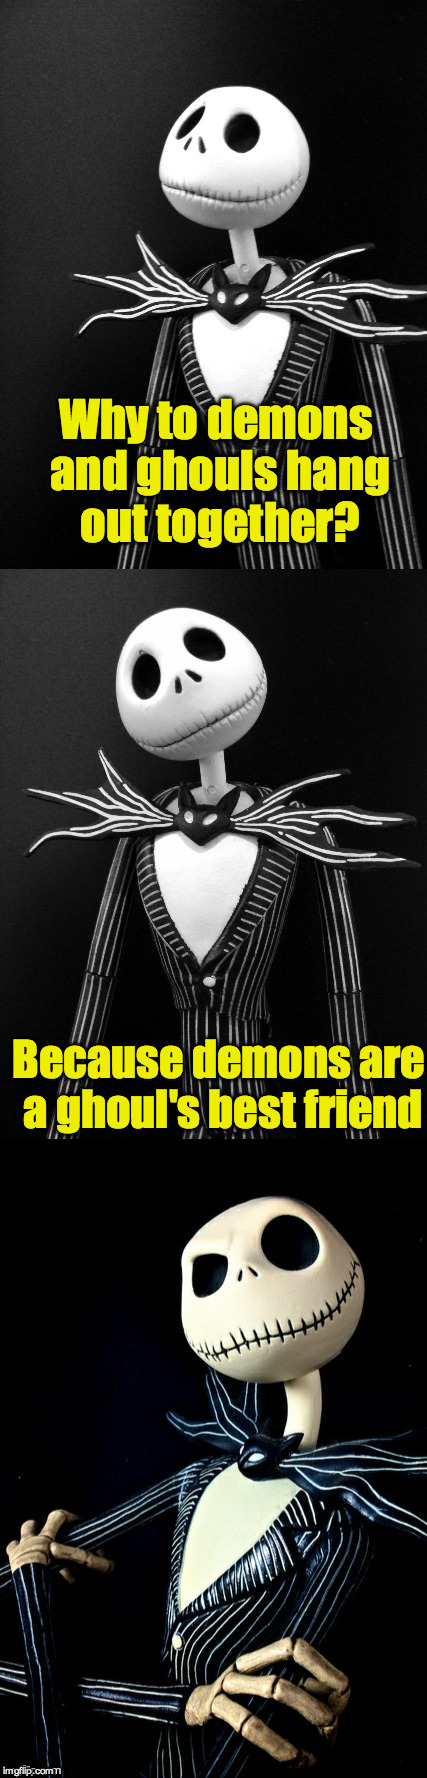 Jack Puns | Why to demons and ghouls hang out together? Because demons are a ghoul's best friend | image tagged in jack puns | made w/ Imgflip meme maker